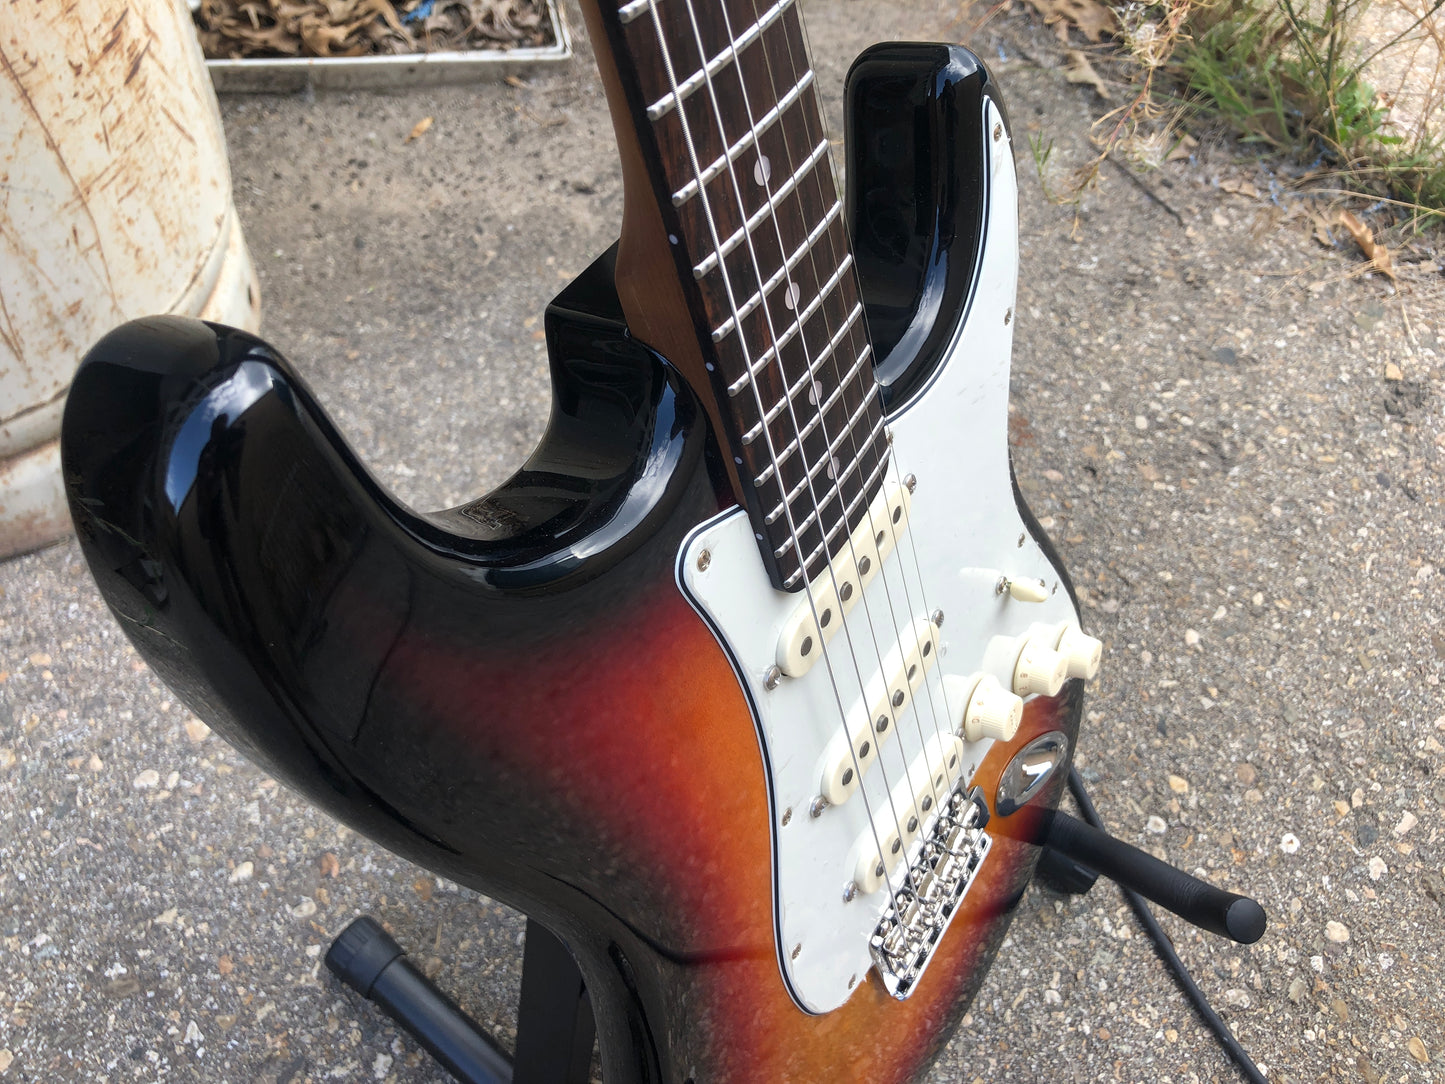 Standard Series S Style with 50's Pickups - Sunburst Ships 14 days afer purchase